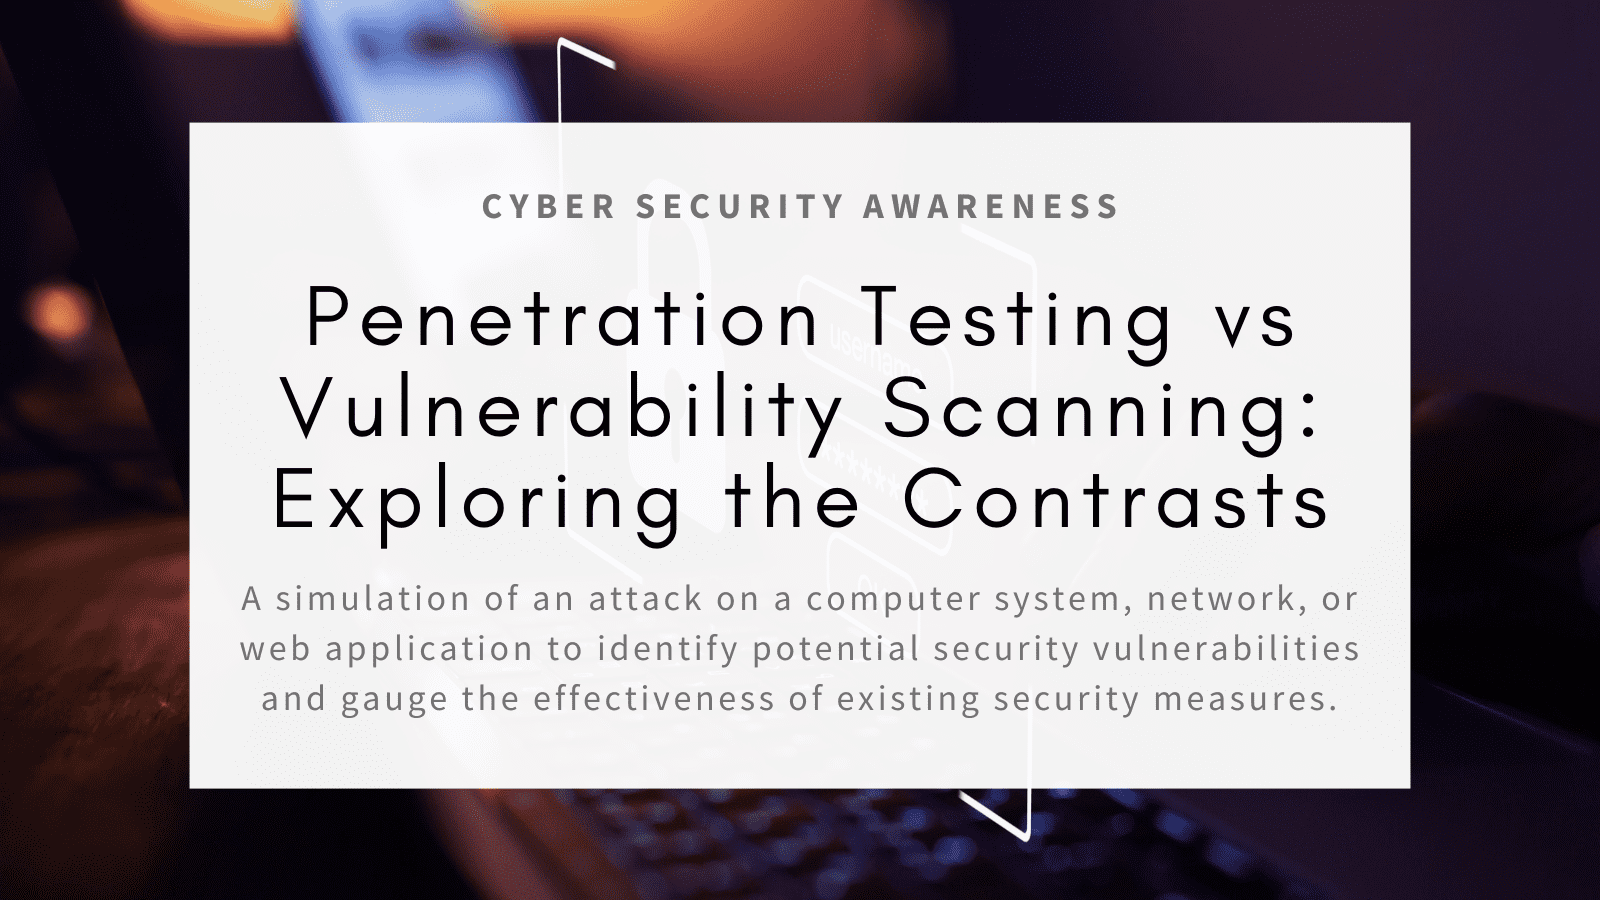 Penetration Testing vs Vulnerability Scanning: Exploring the Contrasts